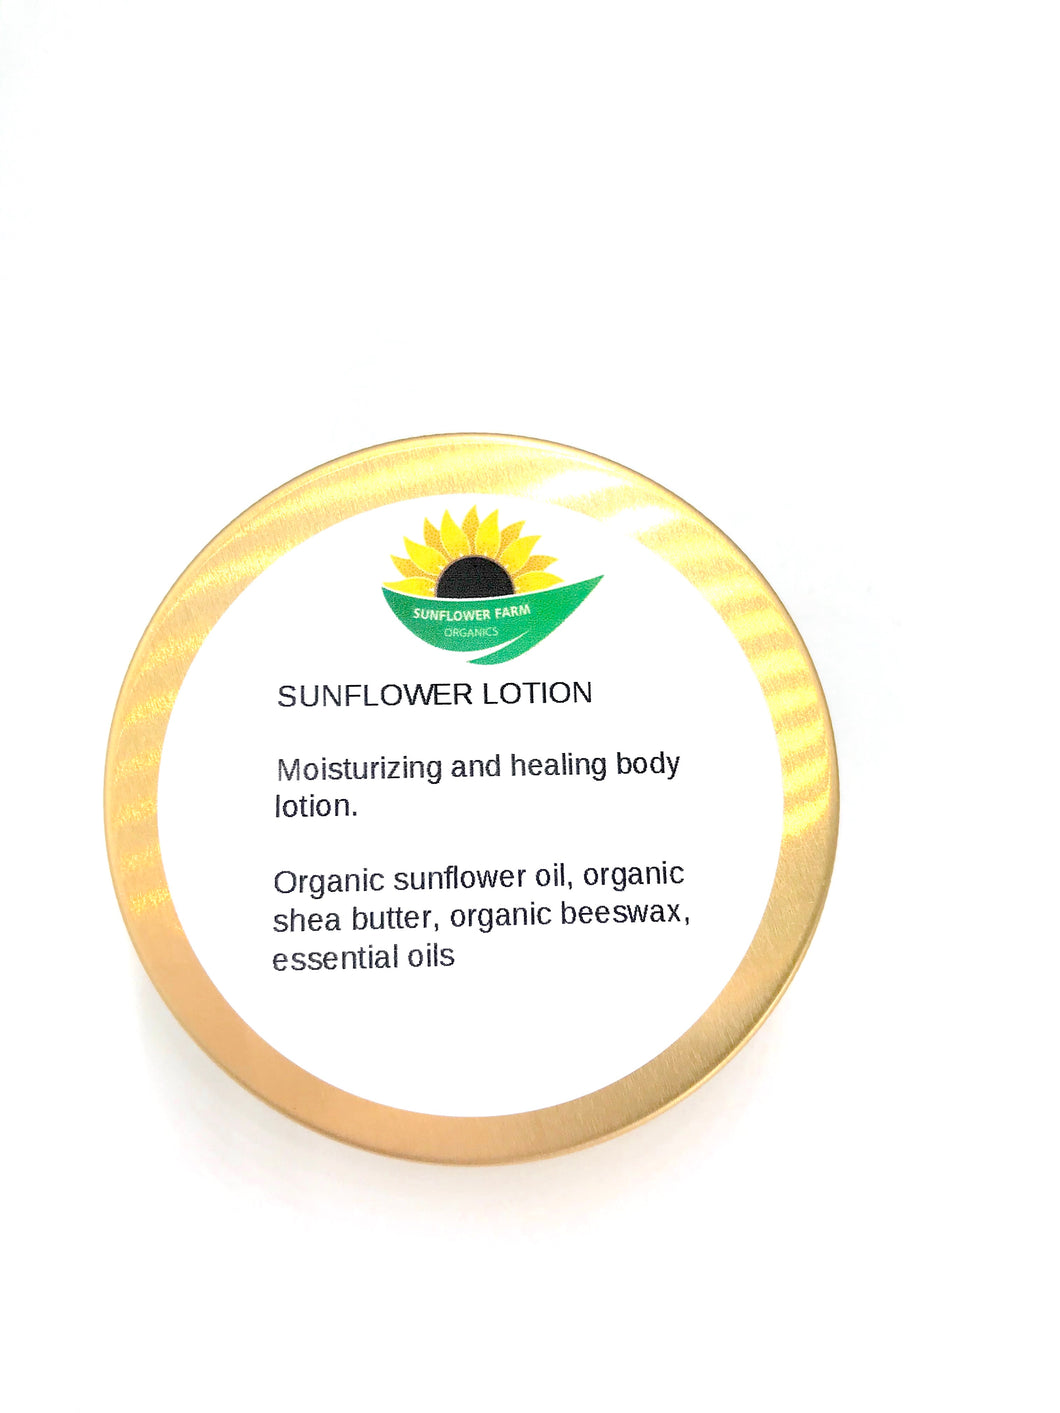 Sunflower Oil Moisturizing Lotion, Dry Itchy Skin Repair, Face and Body Moisturizer, Organic Moisturizer, All Natural Body Lotion Active